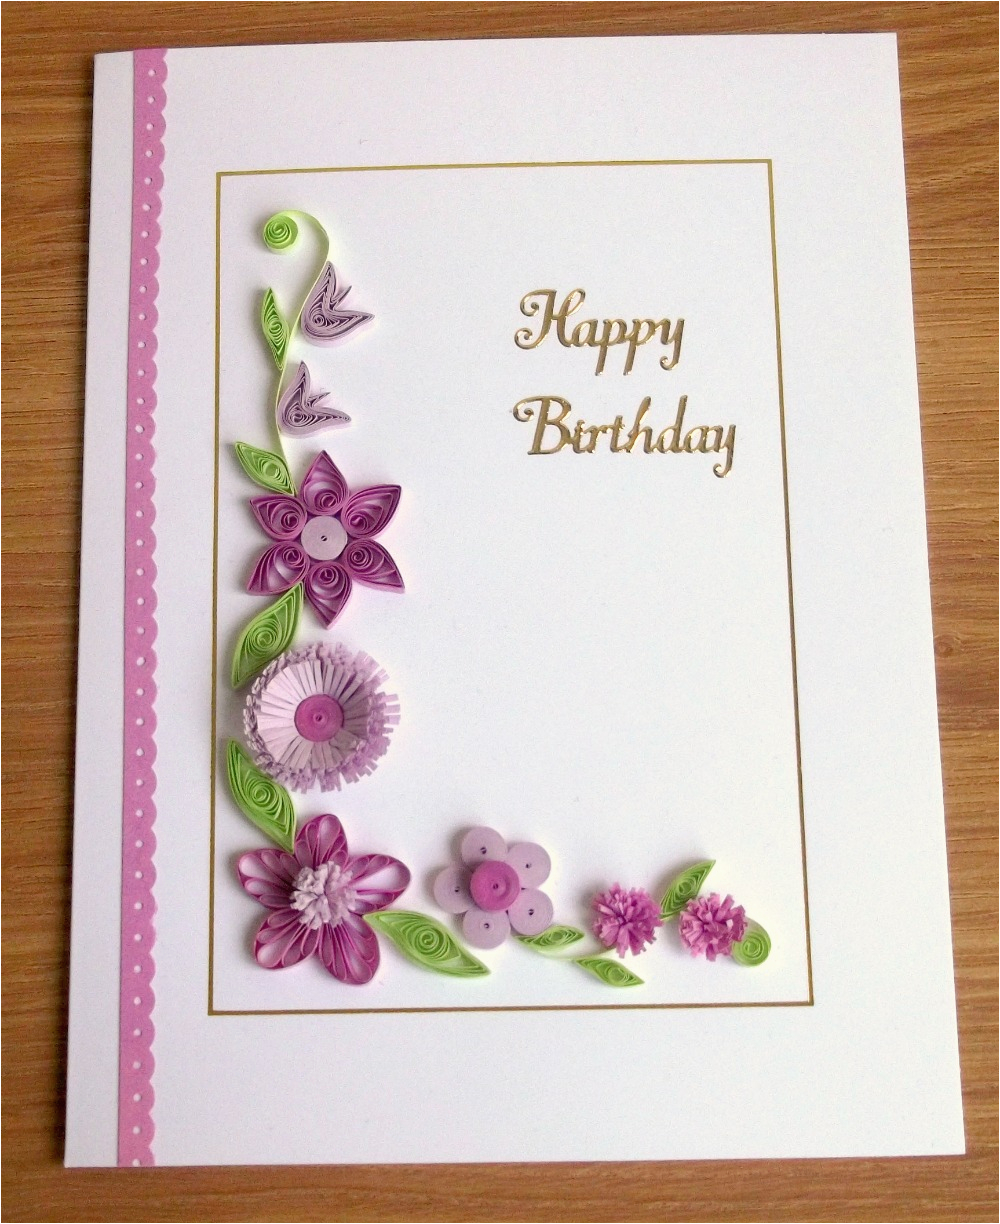 paper daisy cards new twist on old design